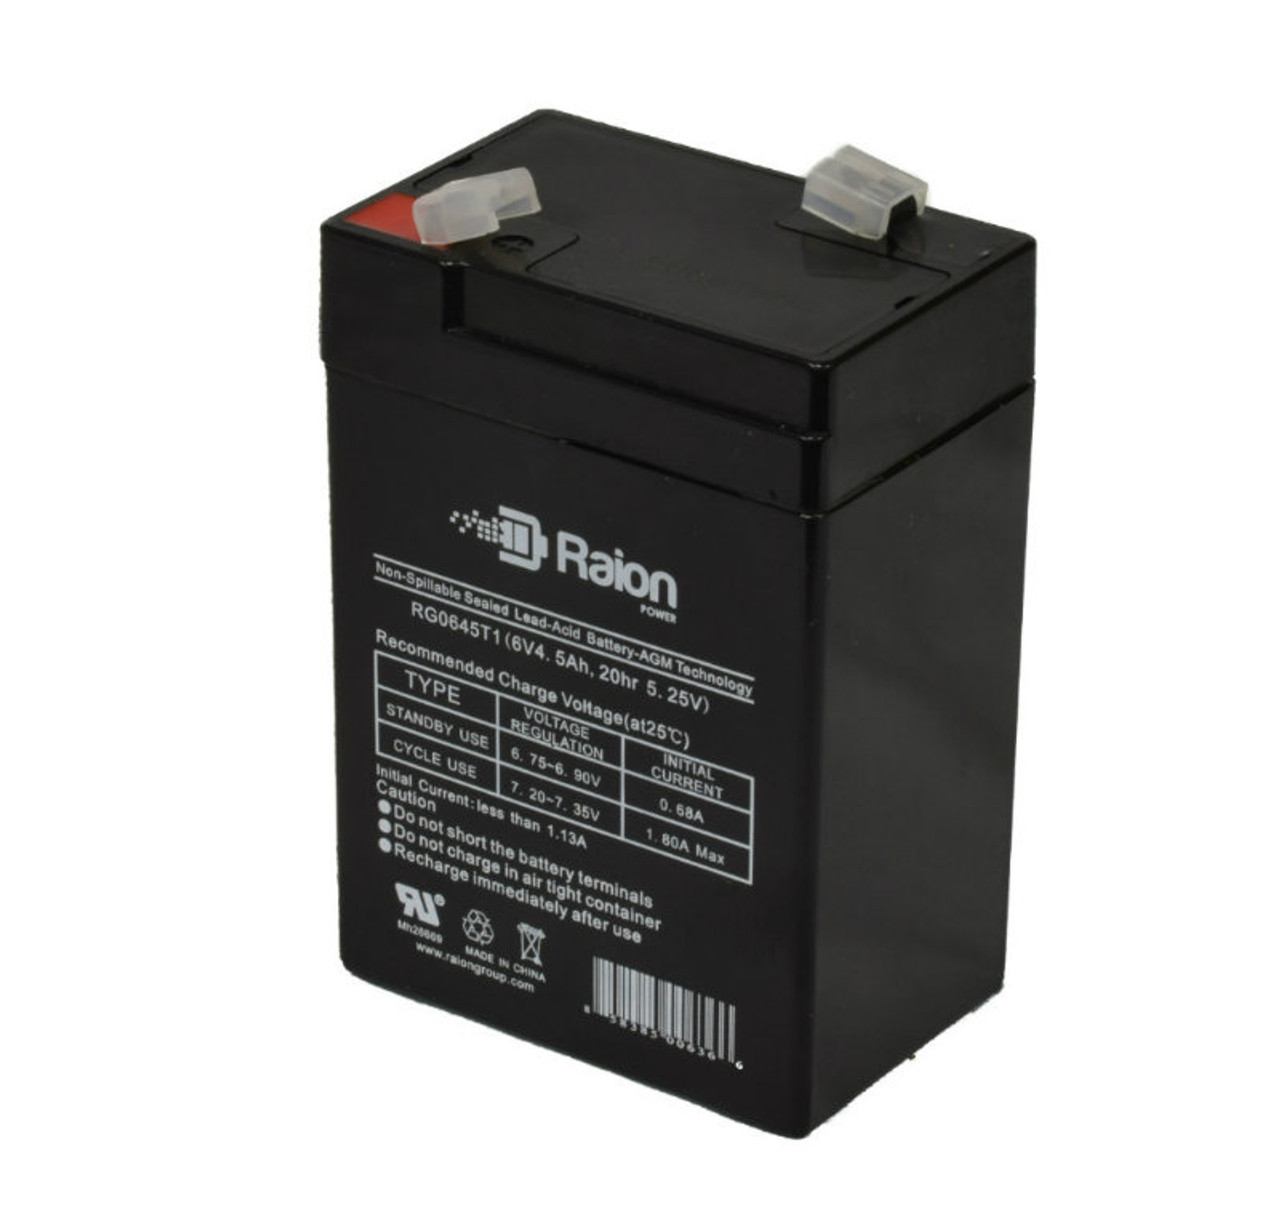 Raion Power RG0645T1 6V 4.5Ah Replacement Battery Cartridge for Peg Perego IGED1088 6V John Deere Express